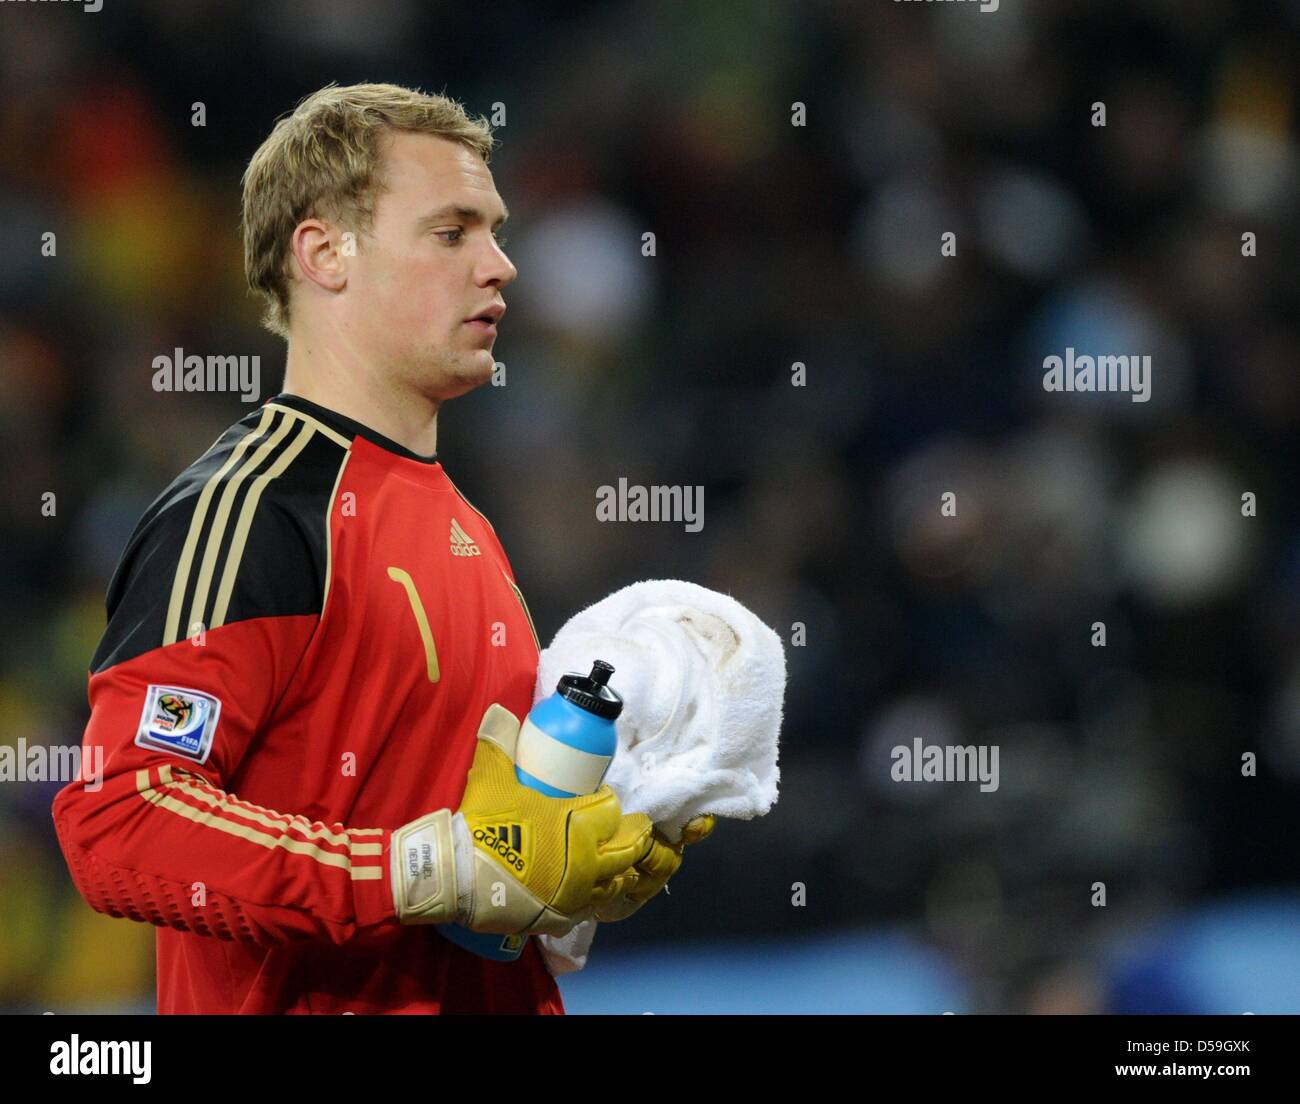 Germany's goalkeeper Manuel Neuer during the 2010 FIFA World Cup group D match between Ghana and Germany at Soccer City, Johannesburg, South Africa 23 June 2010. Photo: Marcus Brandt dpa - Please refer to http://dpaq.de/FIFA-WM2010-TC Stock Photo